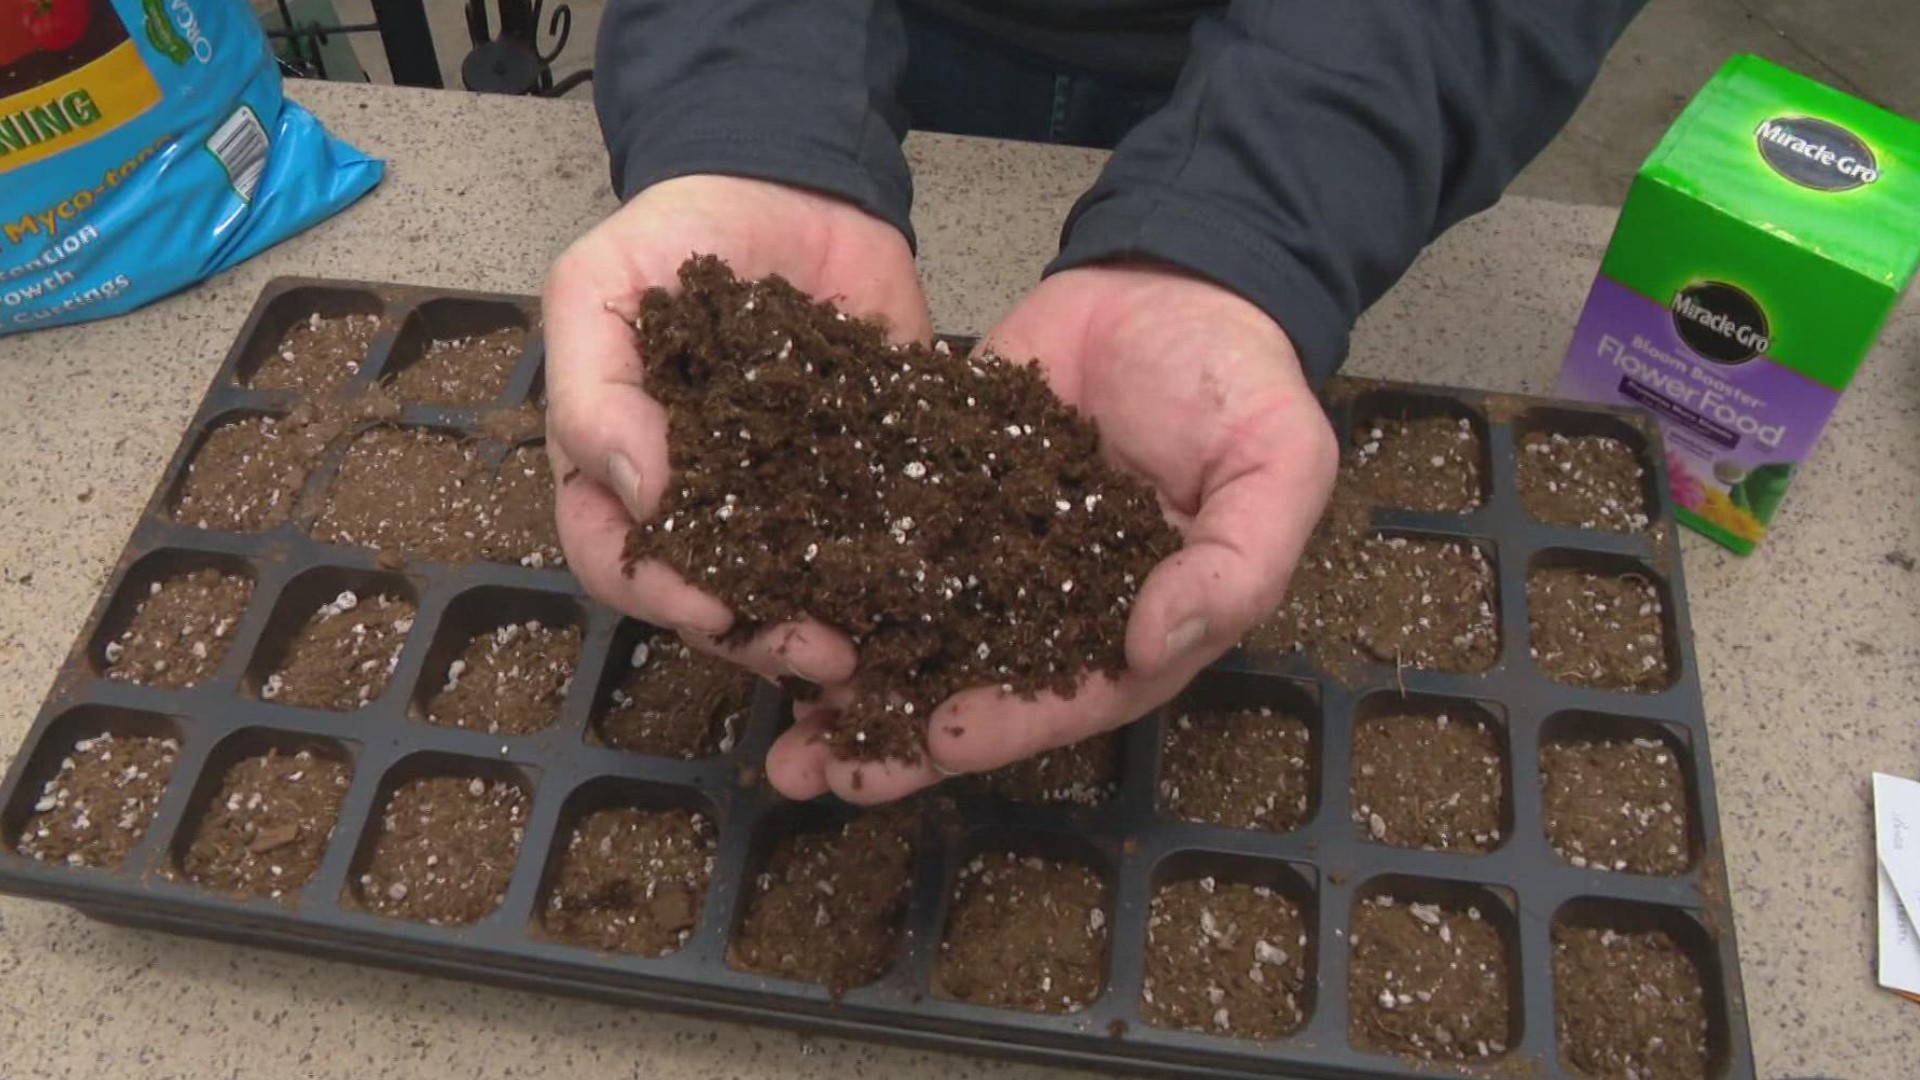 The beginning of March is the best time to start seeds indoors to be ready for transplanting outdoors later this spring.